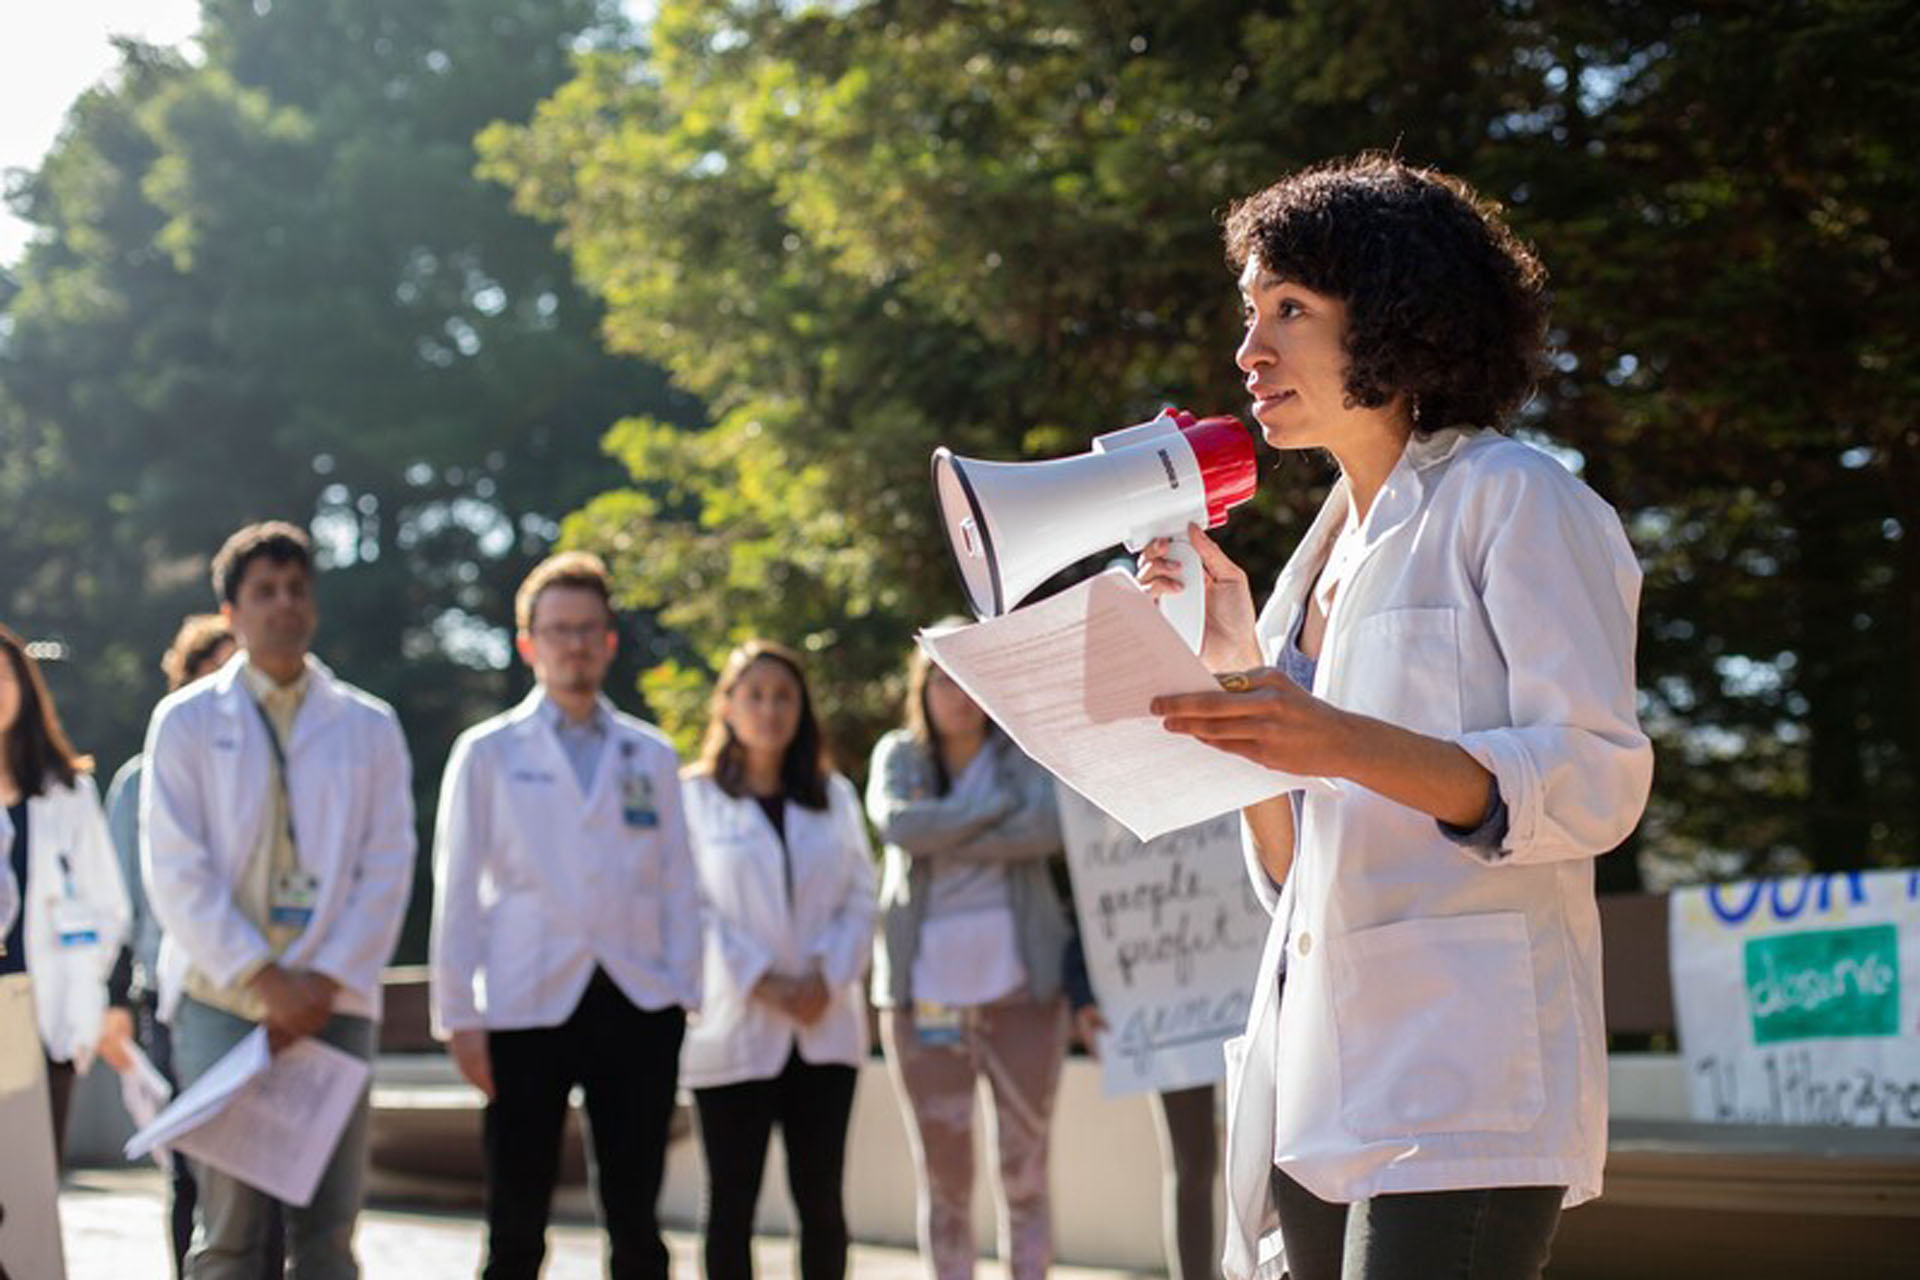 Sheyda Aboii, MS2, speaks to her fellow medical students, including, background left to right, Arun Burra, Andrés Calvillo and Avery Thompson and the community, at a White Coats for Black Lives (WC4BL) Teach-in, which set out to 'model an explicitly anti-racist healthcare education that elevates queer, disabled, formerly criminalized, and undocumented people of color in the communities and hospitals within which we work,' on the 4th anniversary of WC4BL, at a peaceful rally in the Dental School Mezzanine, at the Parnassus campus.